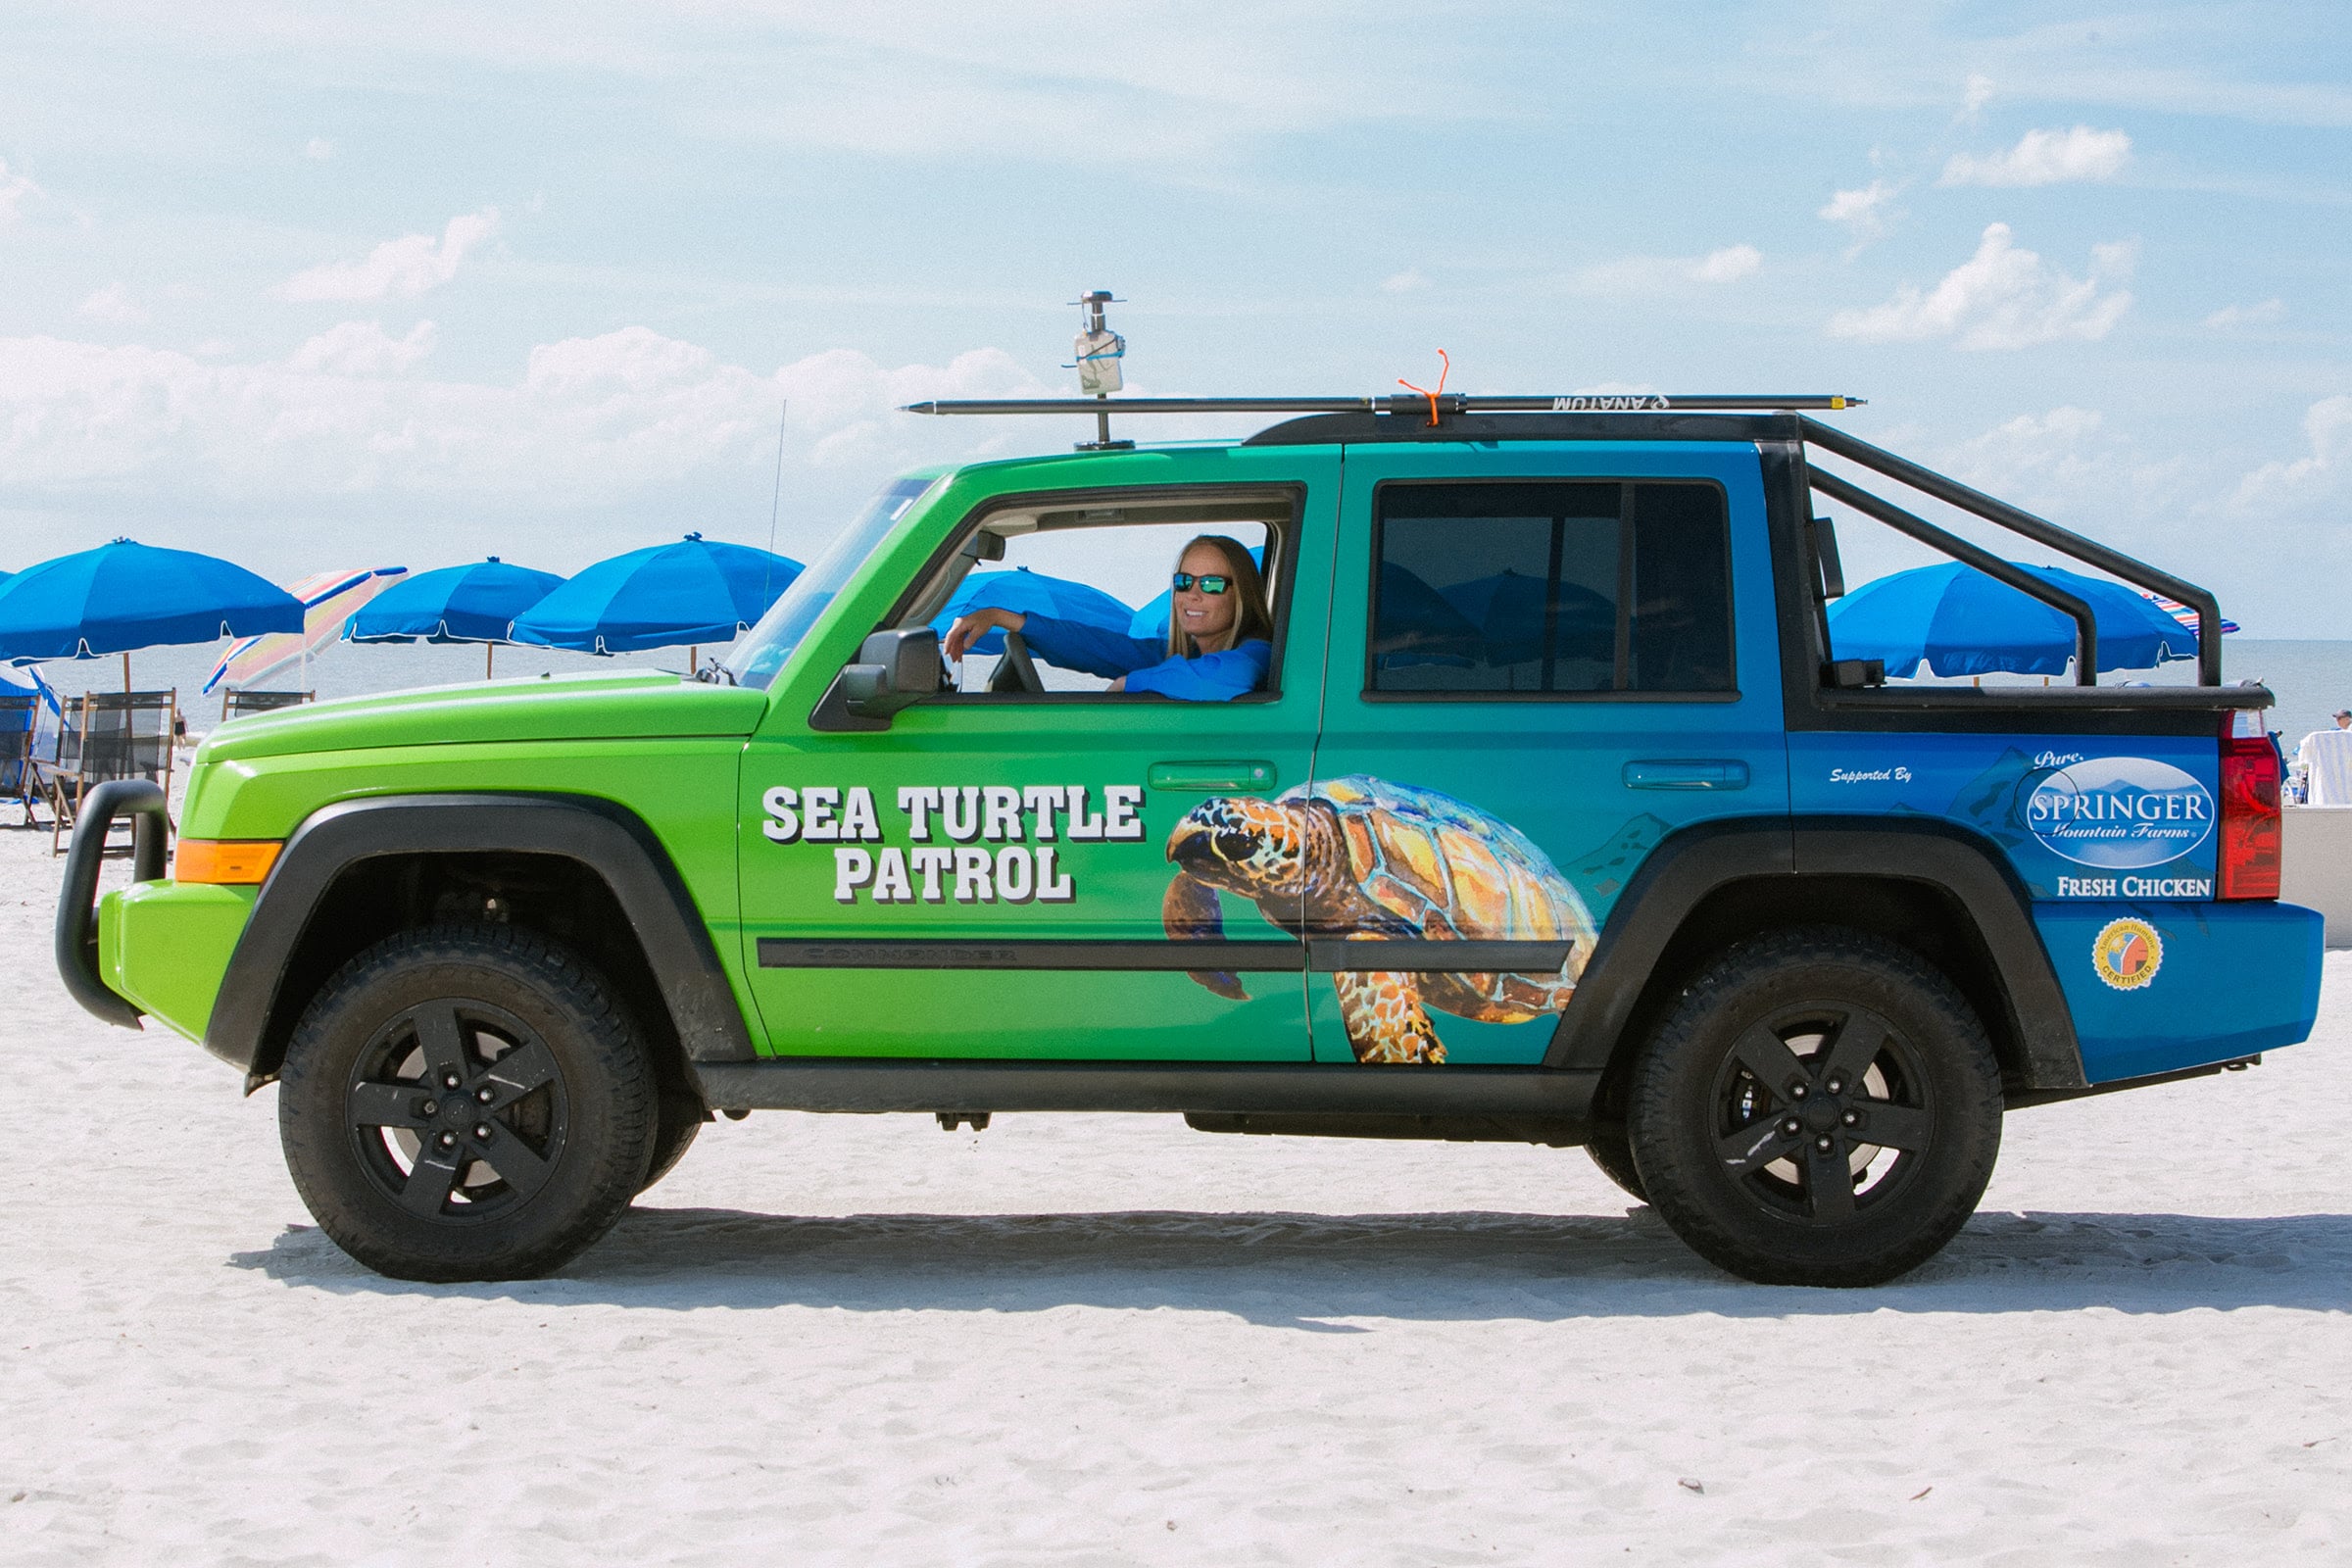 Customer Spotlight Amber Kuehn Drives Sea Turtle Patrol Hilton Head Island Vehicle with Eos Arrow Gold GNSS Receiver Mounted to Roof